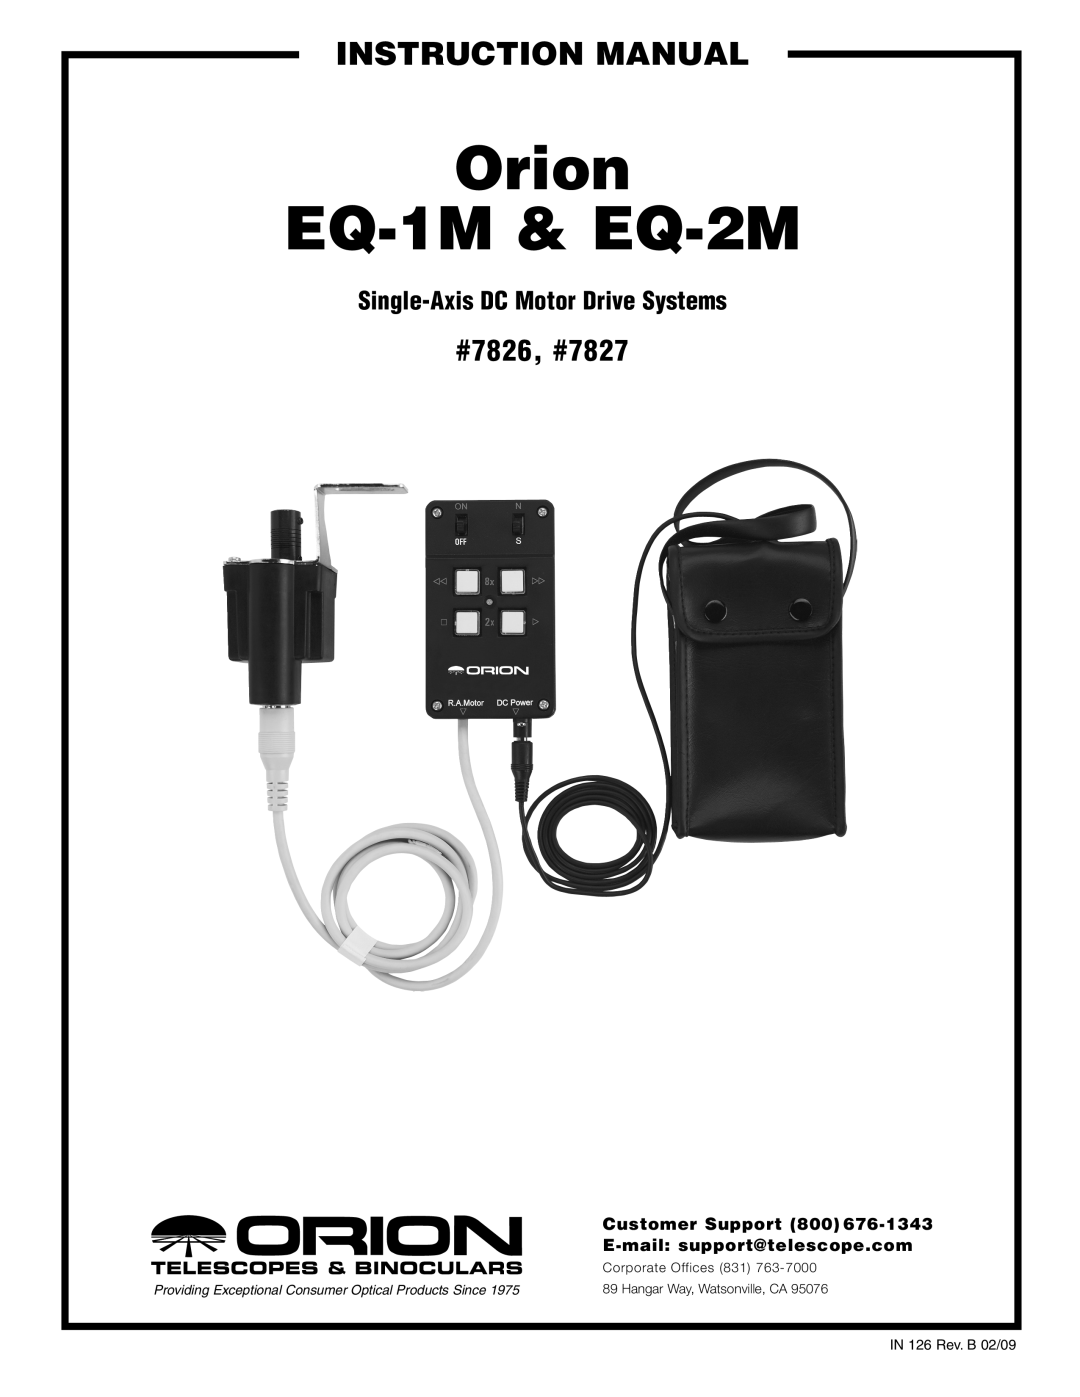 Orion EQ-2M instruction manual Single-Axis DC Motor Drive Systems, Customer Support, E-mail support@telescope.com, Orion 